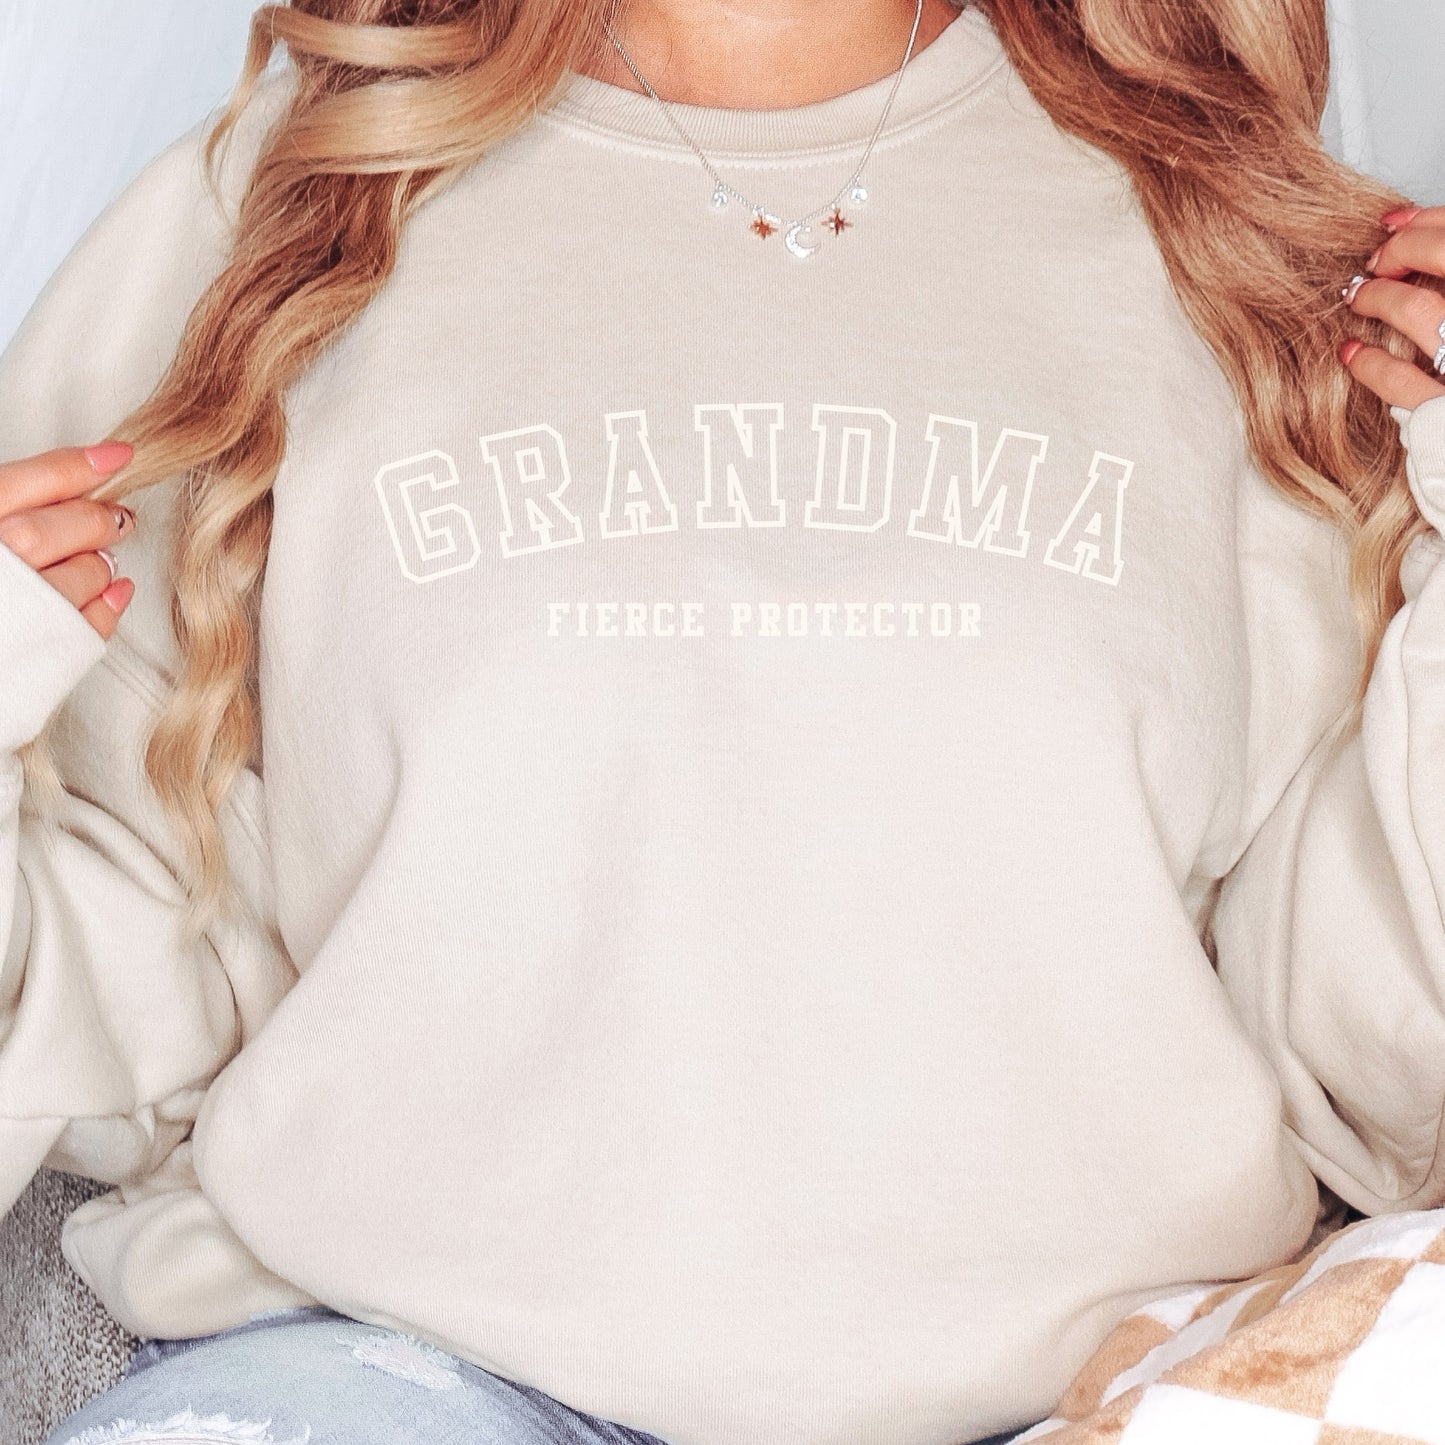 The front of the sweatshirt proudly displays the phrase Grandma Fierce Protector in a bold and eye catching font. This message serves as a reminder that we reject victim blaming and support those who have faced injustice. Your grandma can wear her strength proudly, embracing both comfort and empowerment.